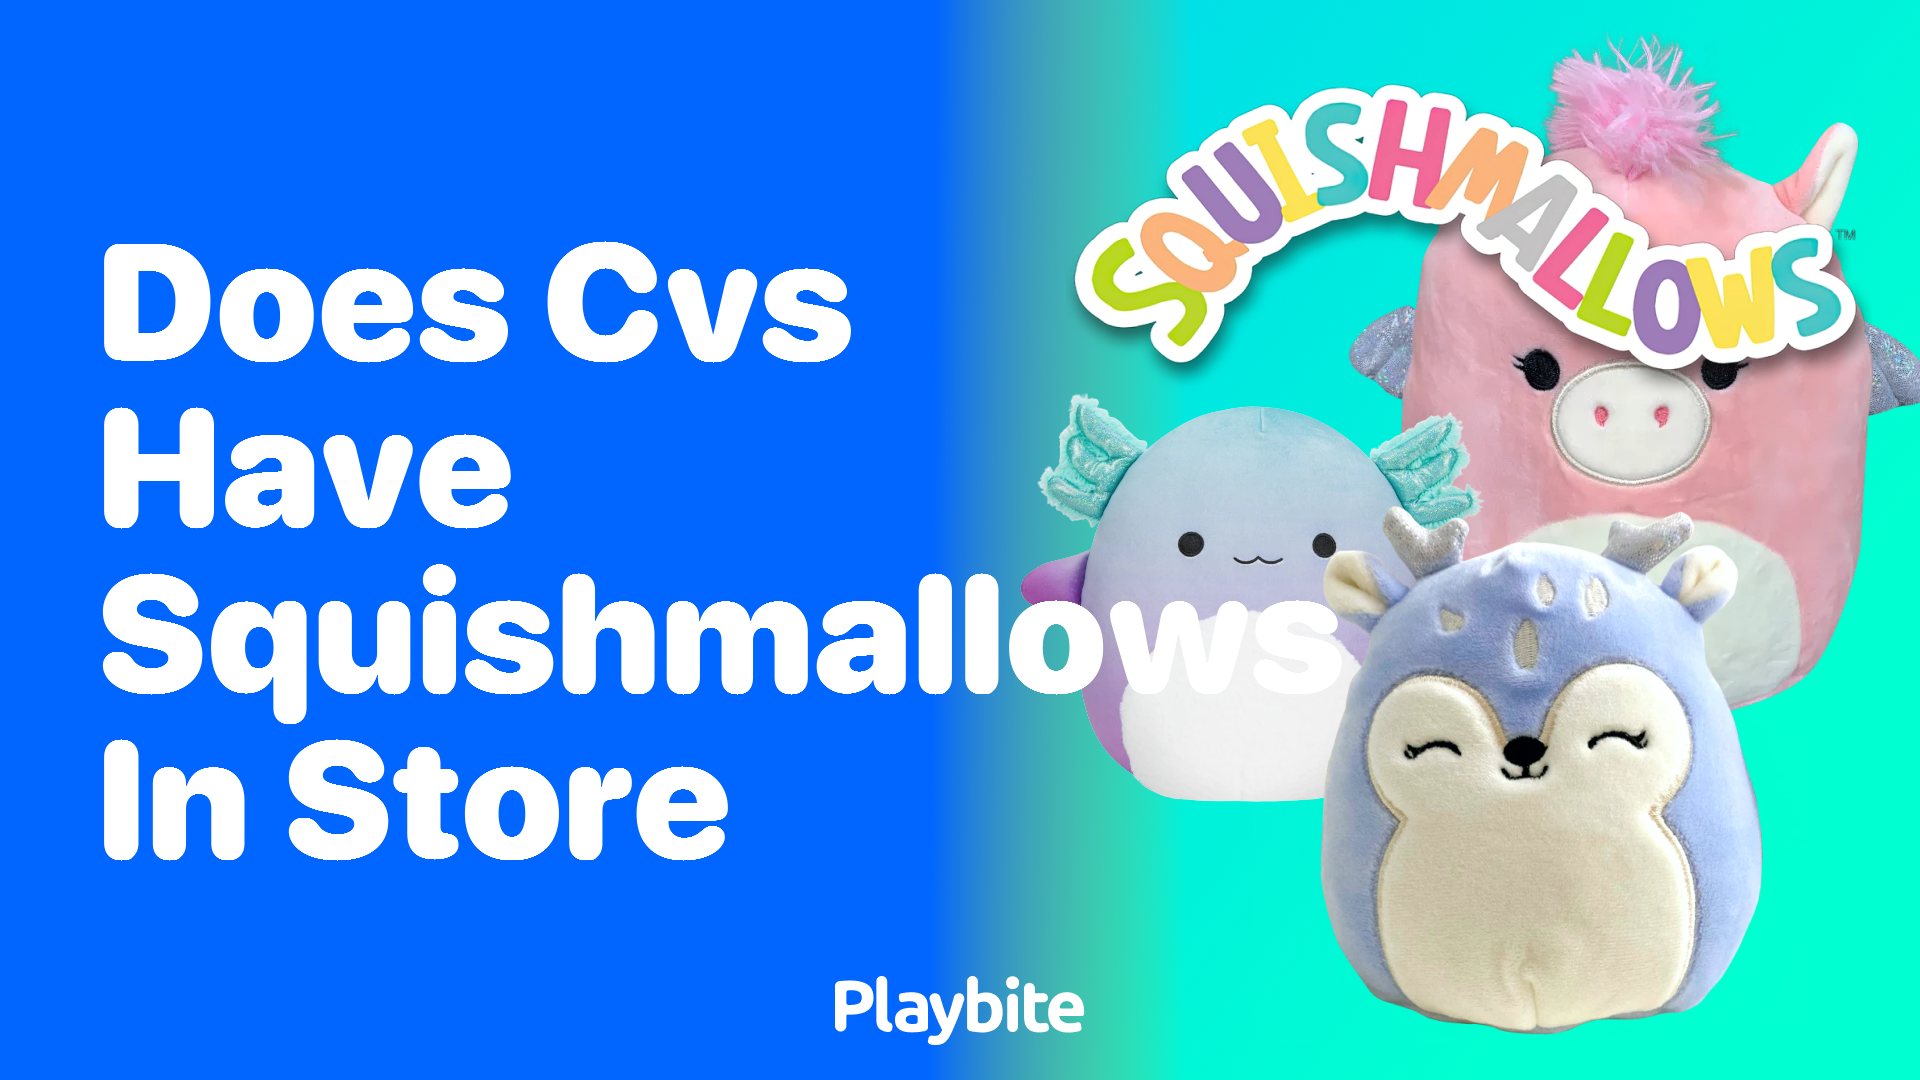 Does CVS Have Squishmallows in Store?